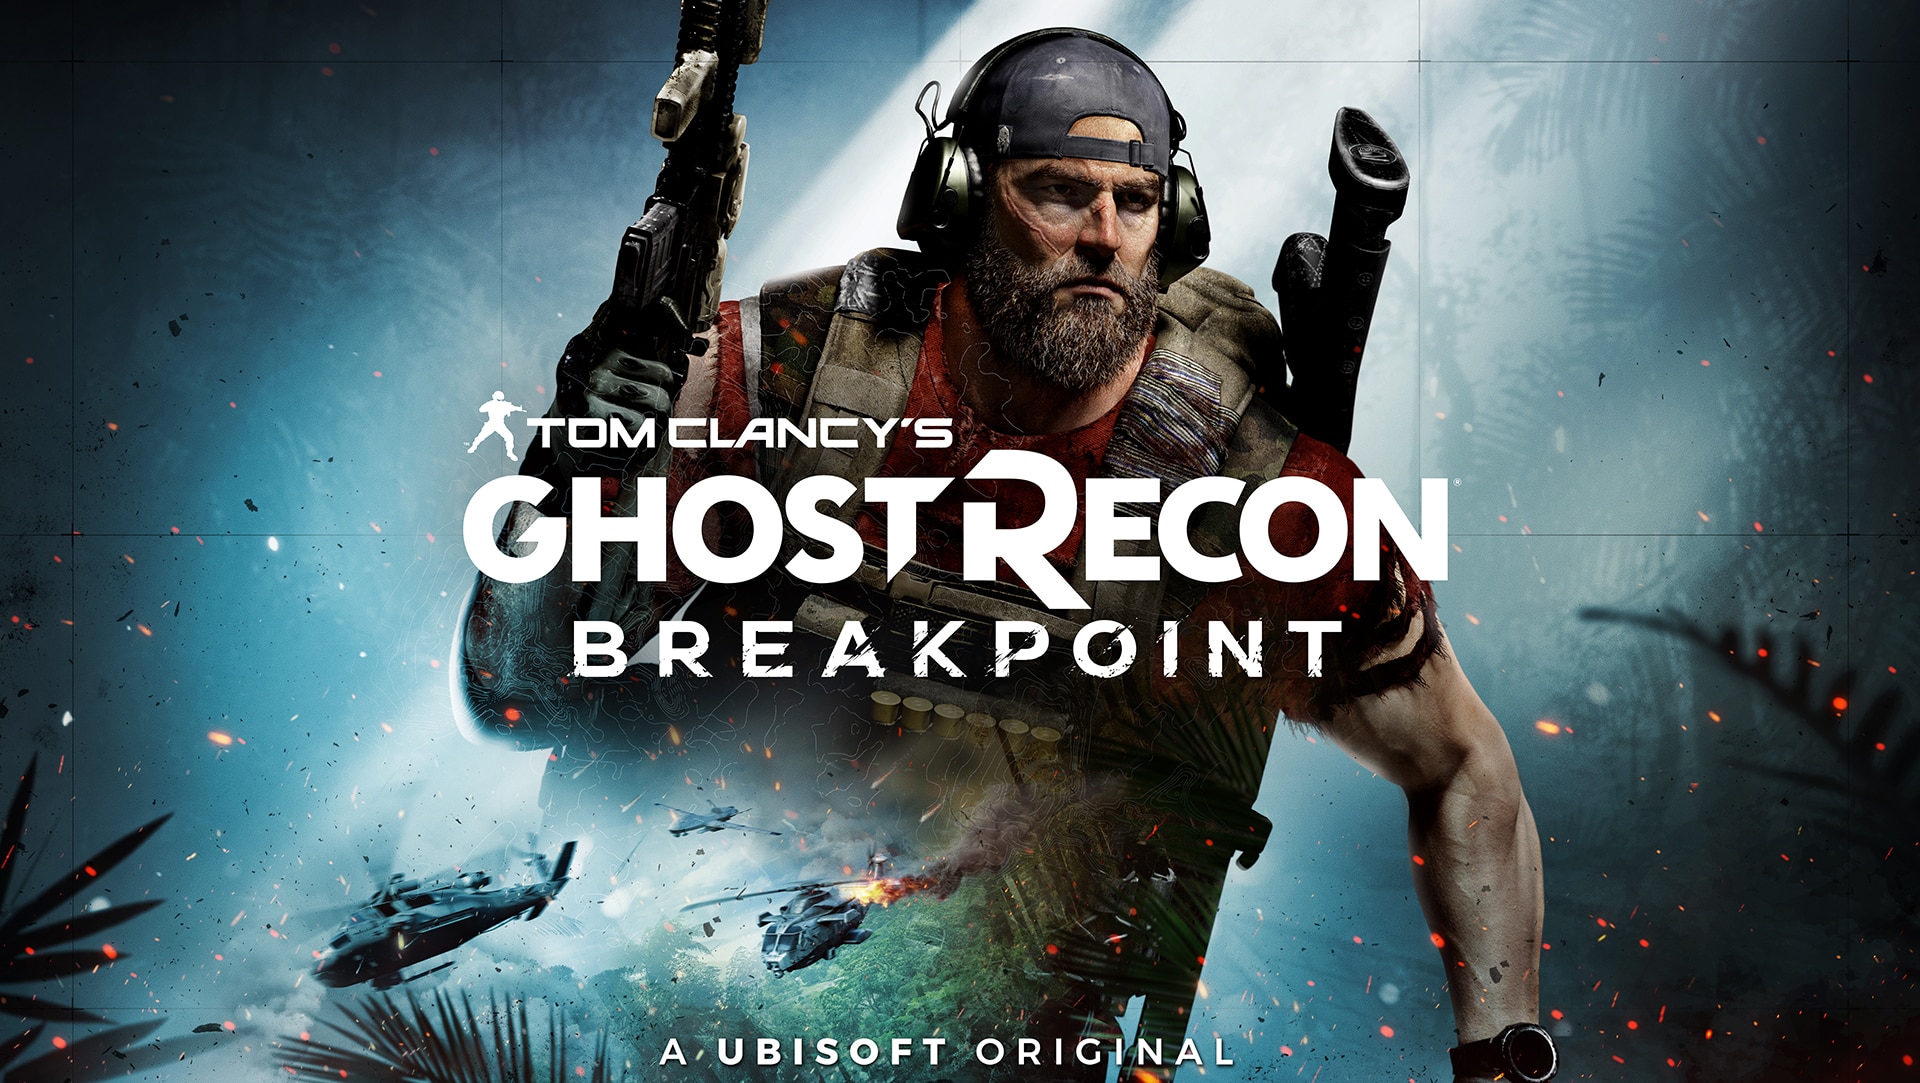 Content Ghost Recon Breakpoint editions Ubisoft Help